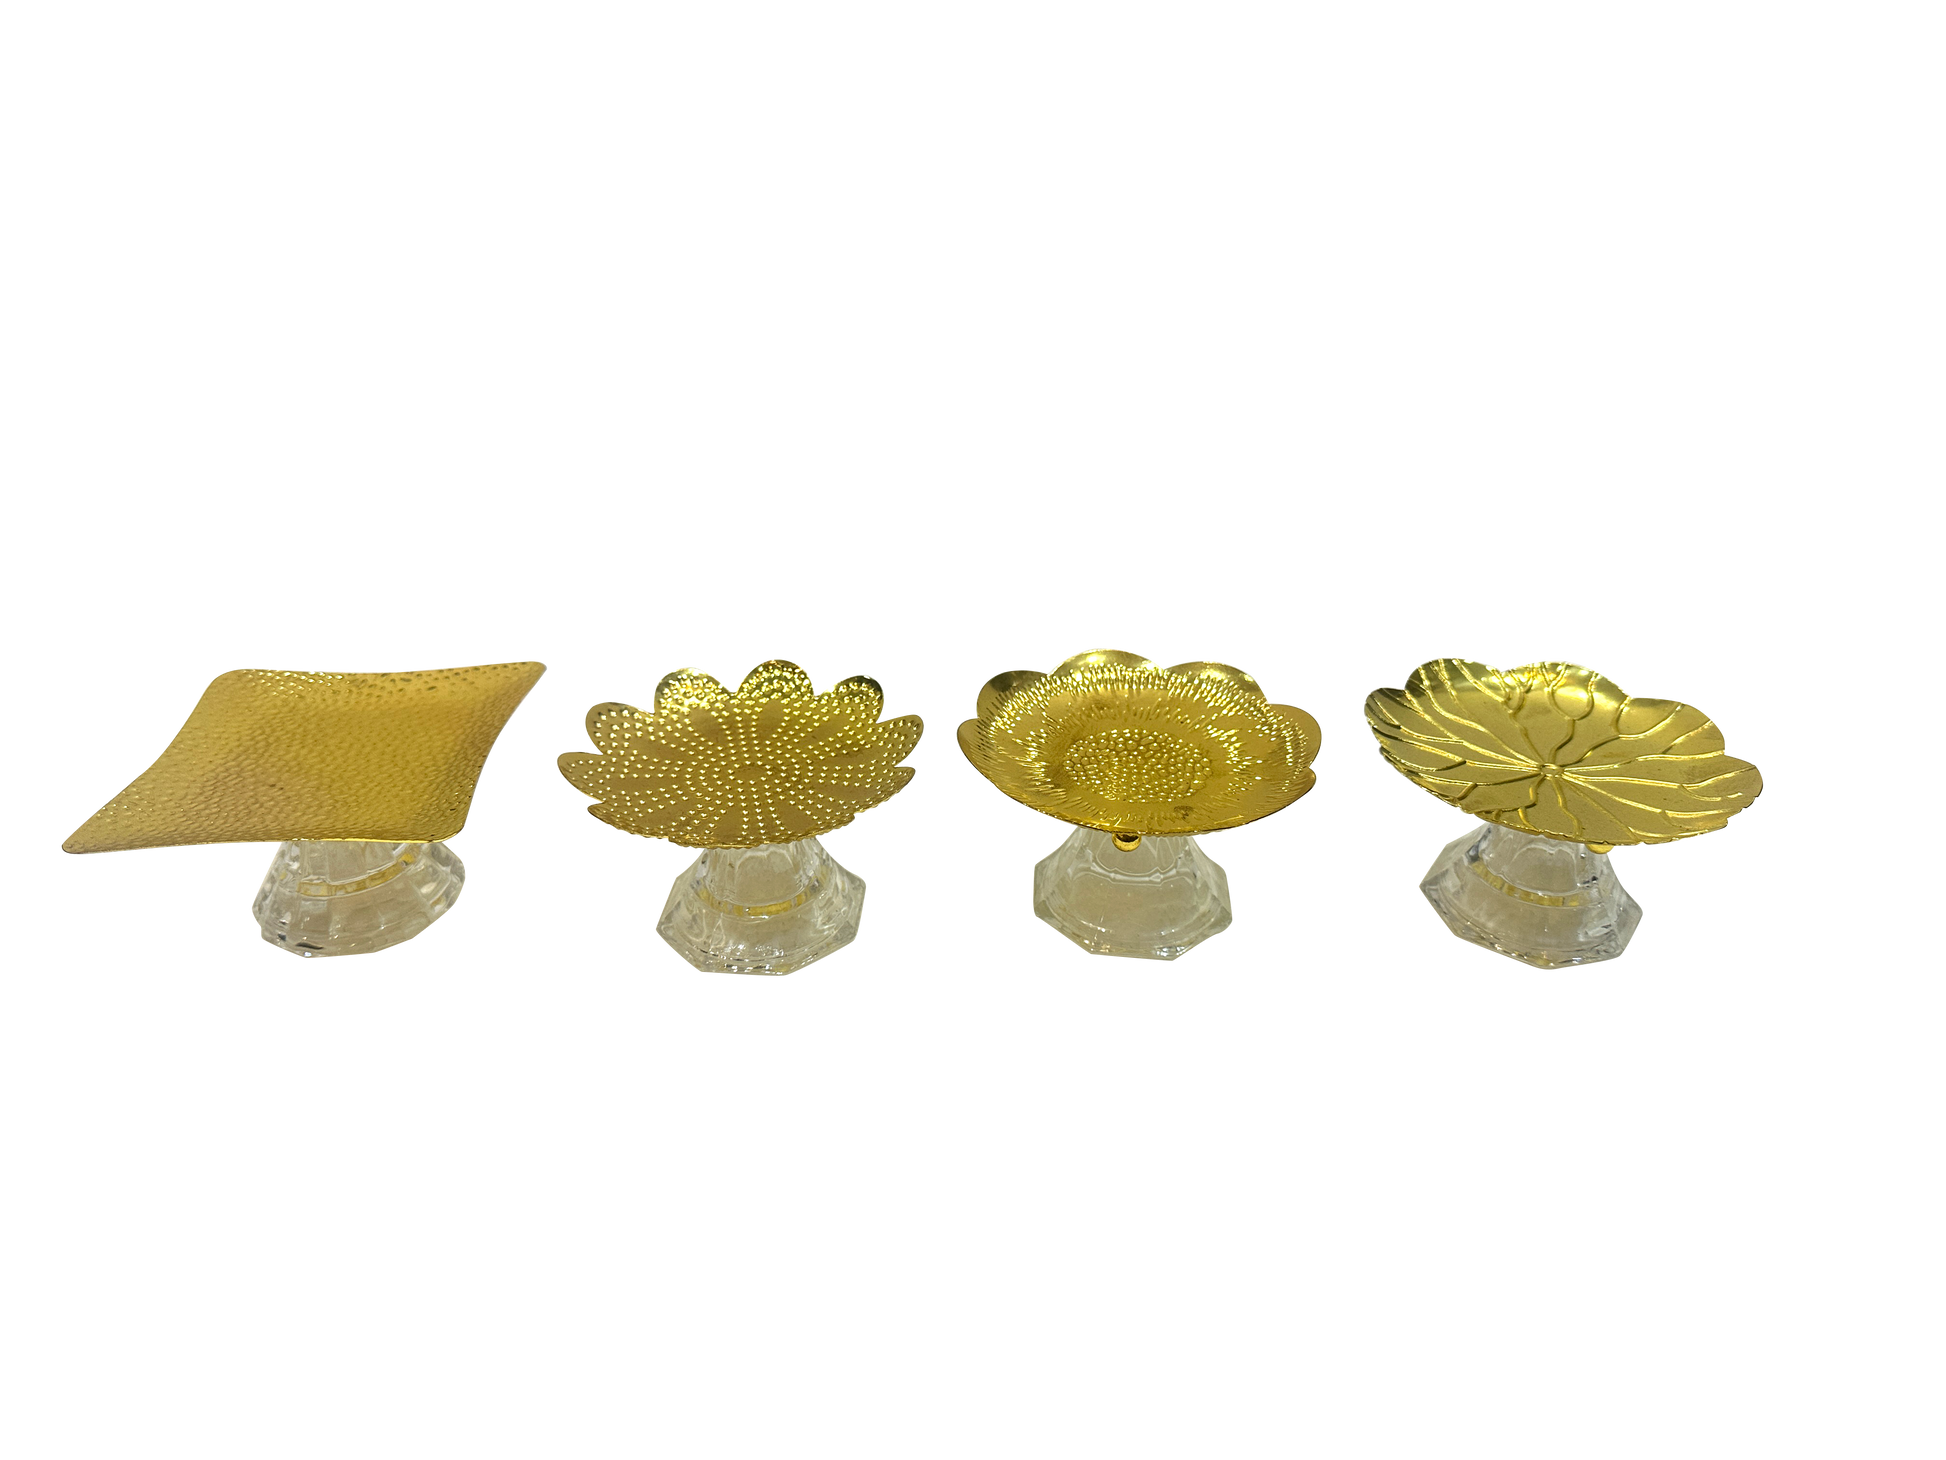 Glass-Based Vintage With Golden Top - Sunset Gifts Store